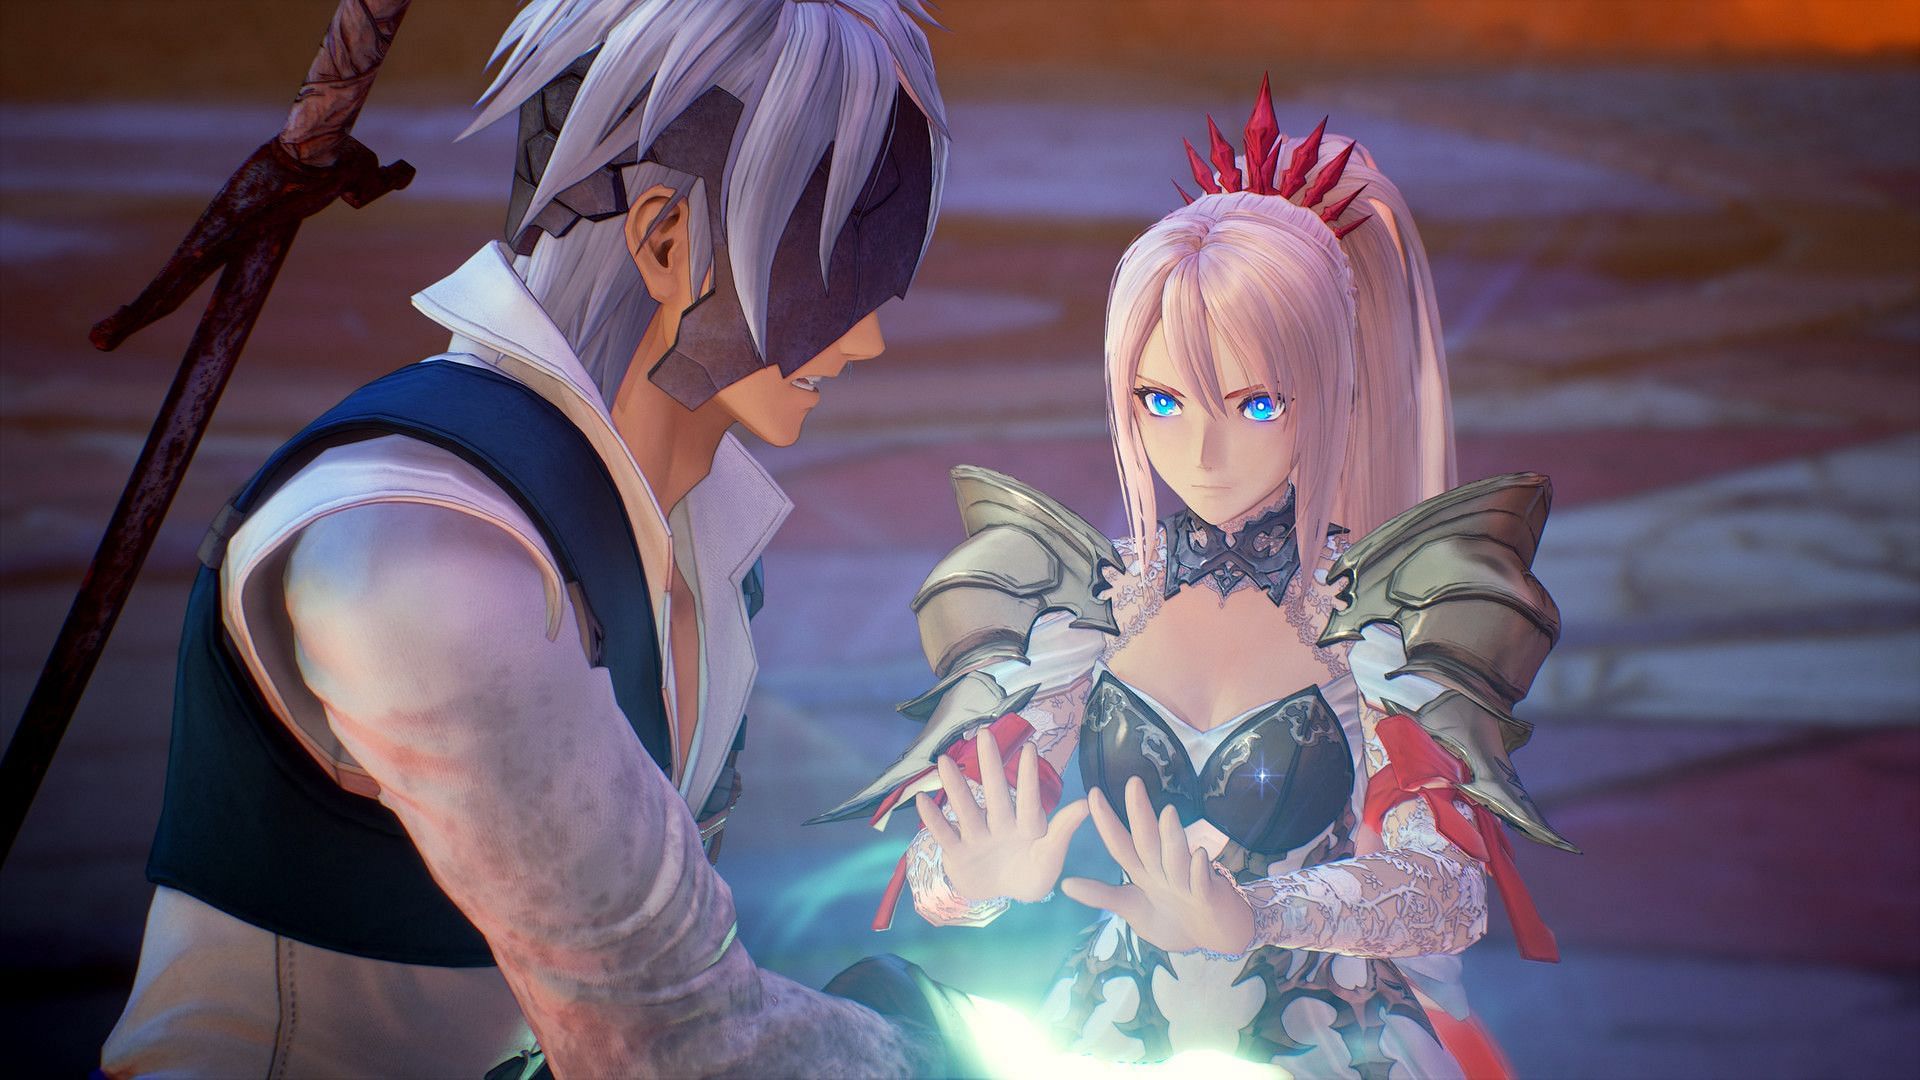 The best RPG deals in the Steam Spring Sale: Tales of Arise (Image via Bandai Namco)